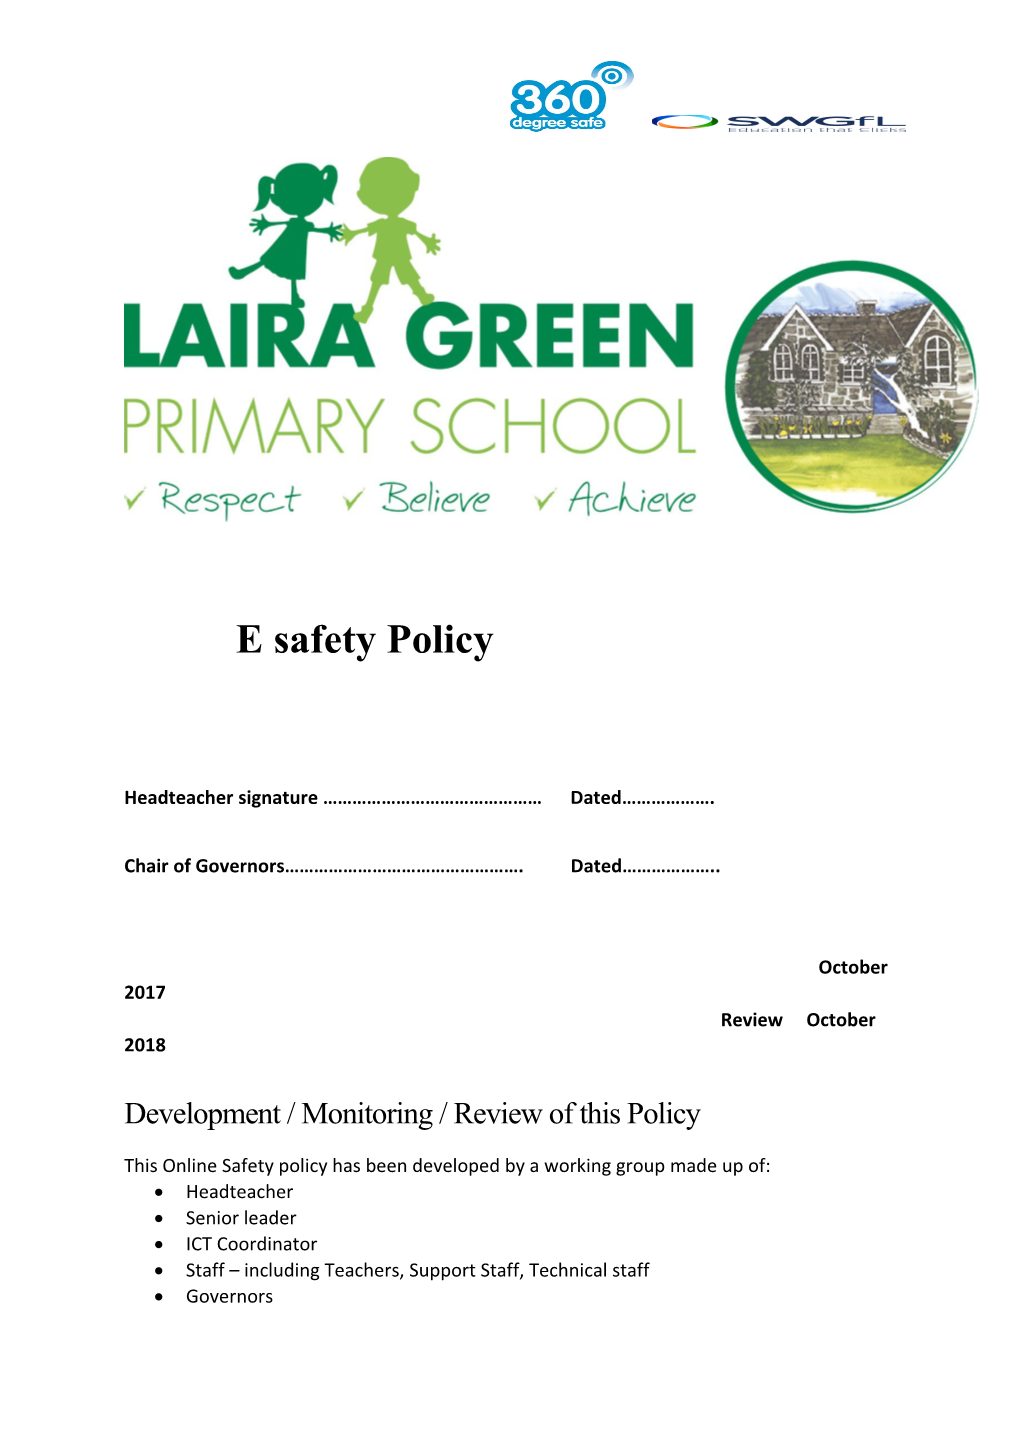 Online Safety Policy Template